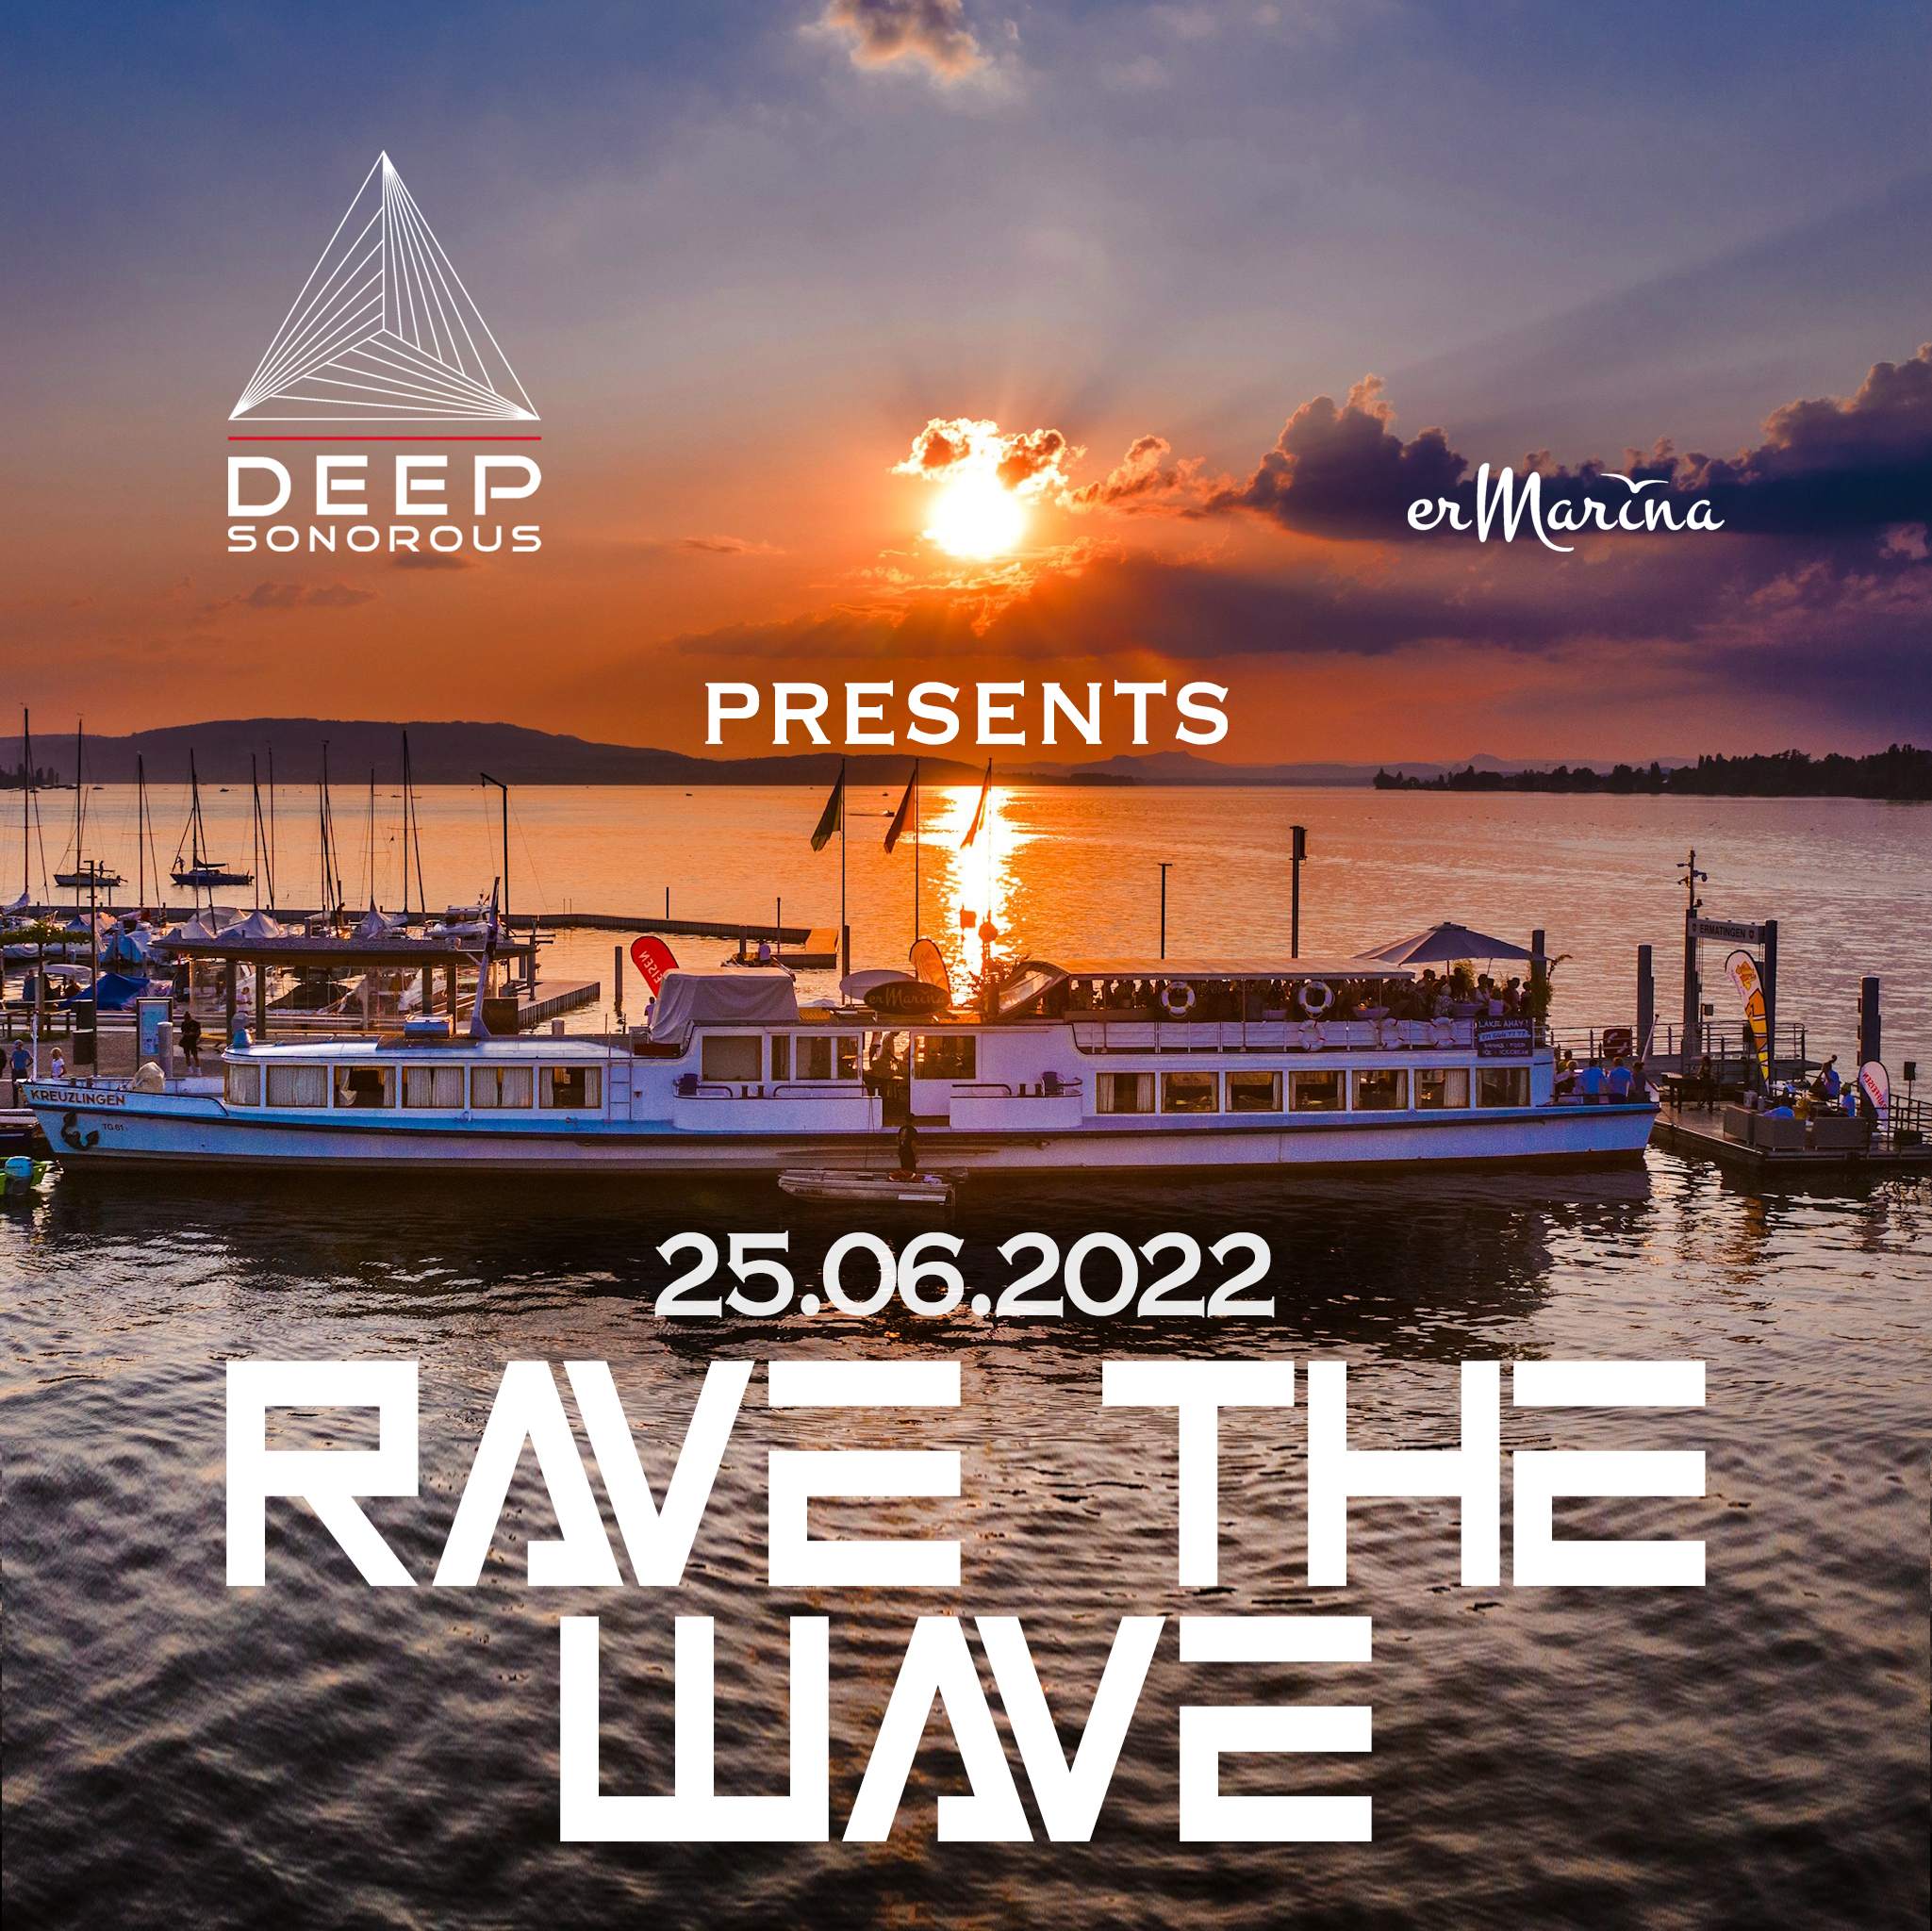 RAVE THE WAVE - フライヤー表